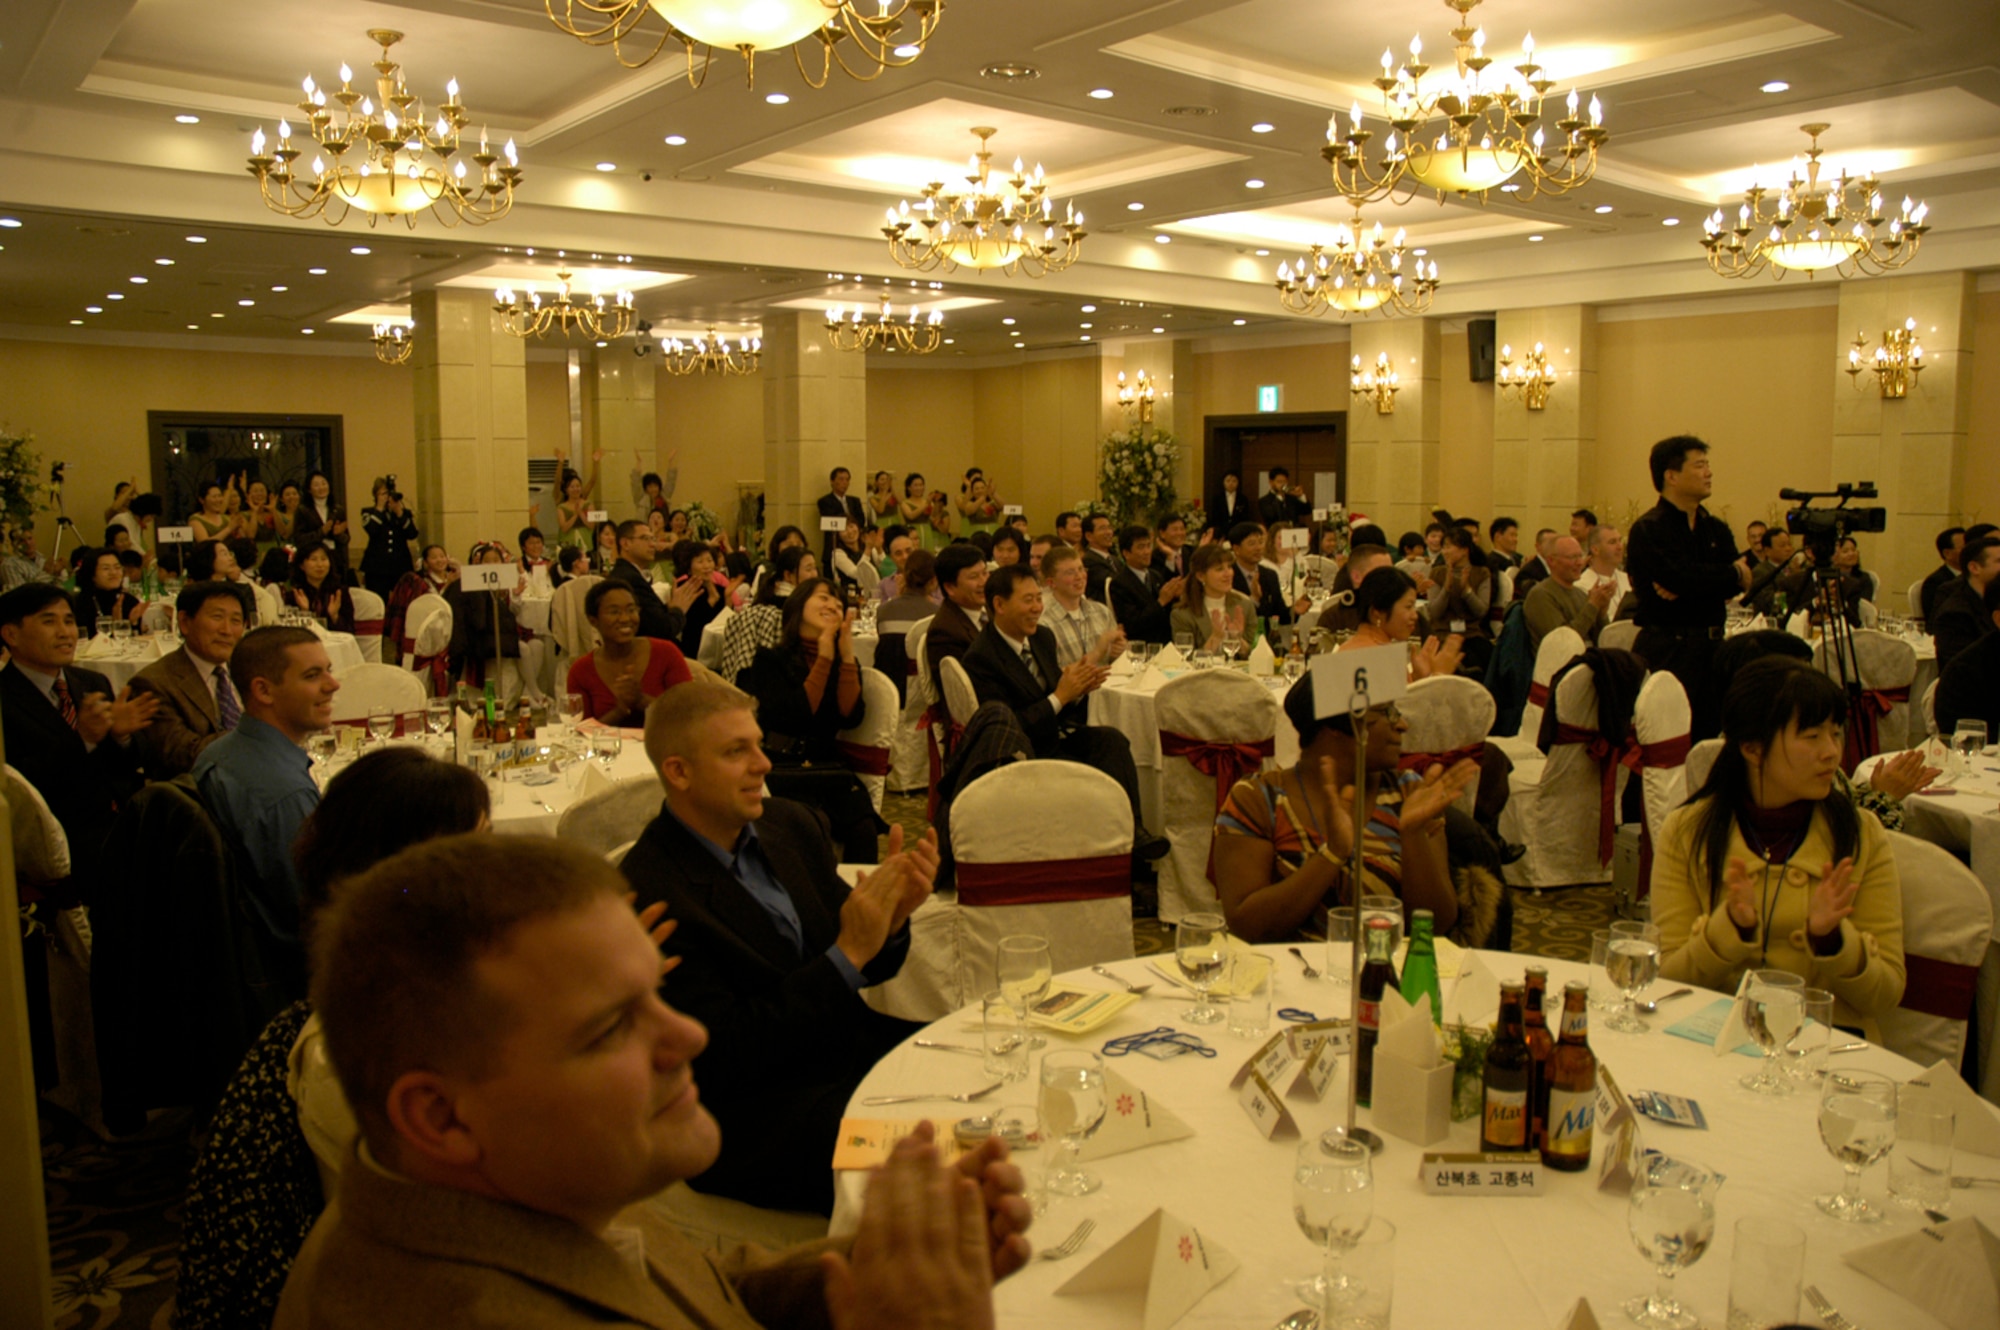 KUNSAN AIR BASE, South Korea -- Attendees at the Gunsan City Board of Education Friendship and Volunteer Appreciation dinner appluad for the Air Force Band of the Pacific after their performance Dec. 4. The Elmendorf Air Force Base, Alaska based band performed holiday music and jazz pieces at the event as part of their civic outreach and the base's Good Neighbor Program. (U.S. Air Force Photo/Master Sgt. Sean P. Houlihan)